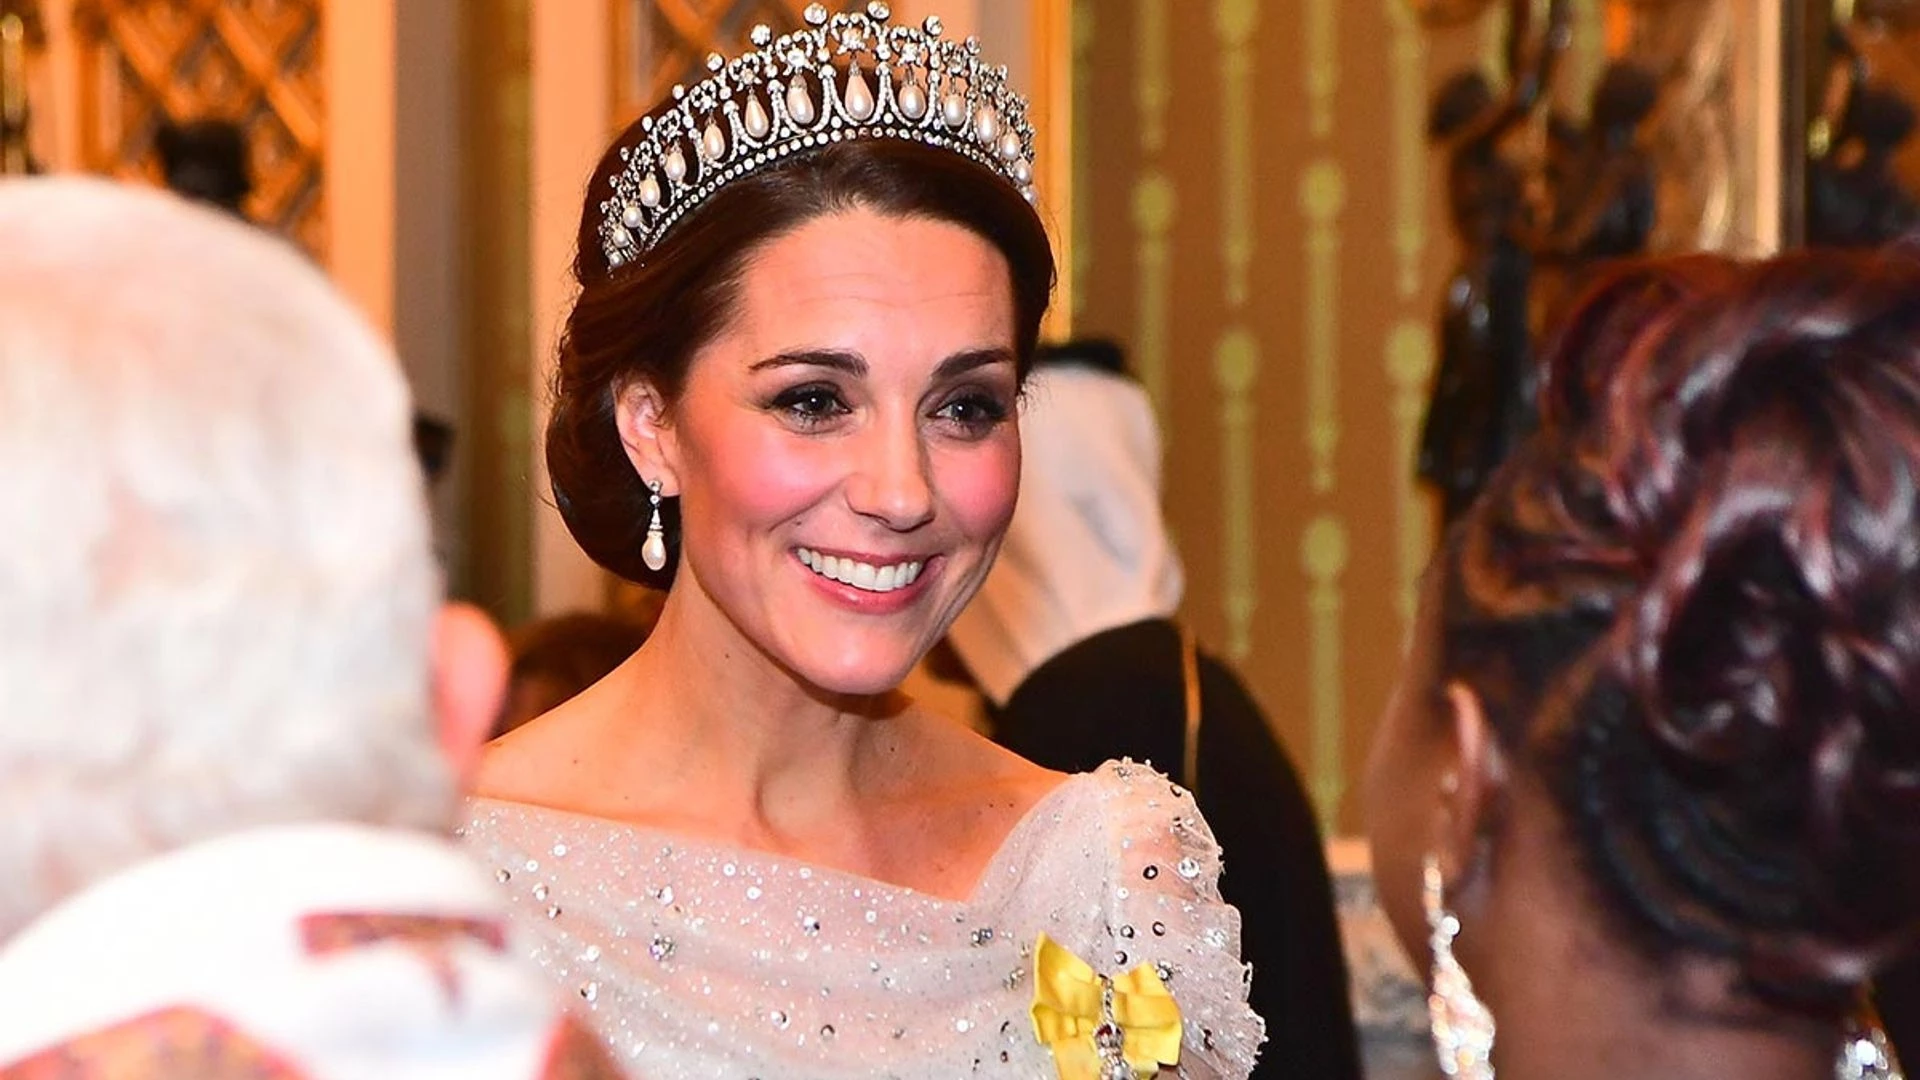 Kate Middleton received criticism